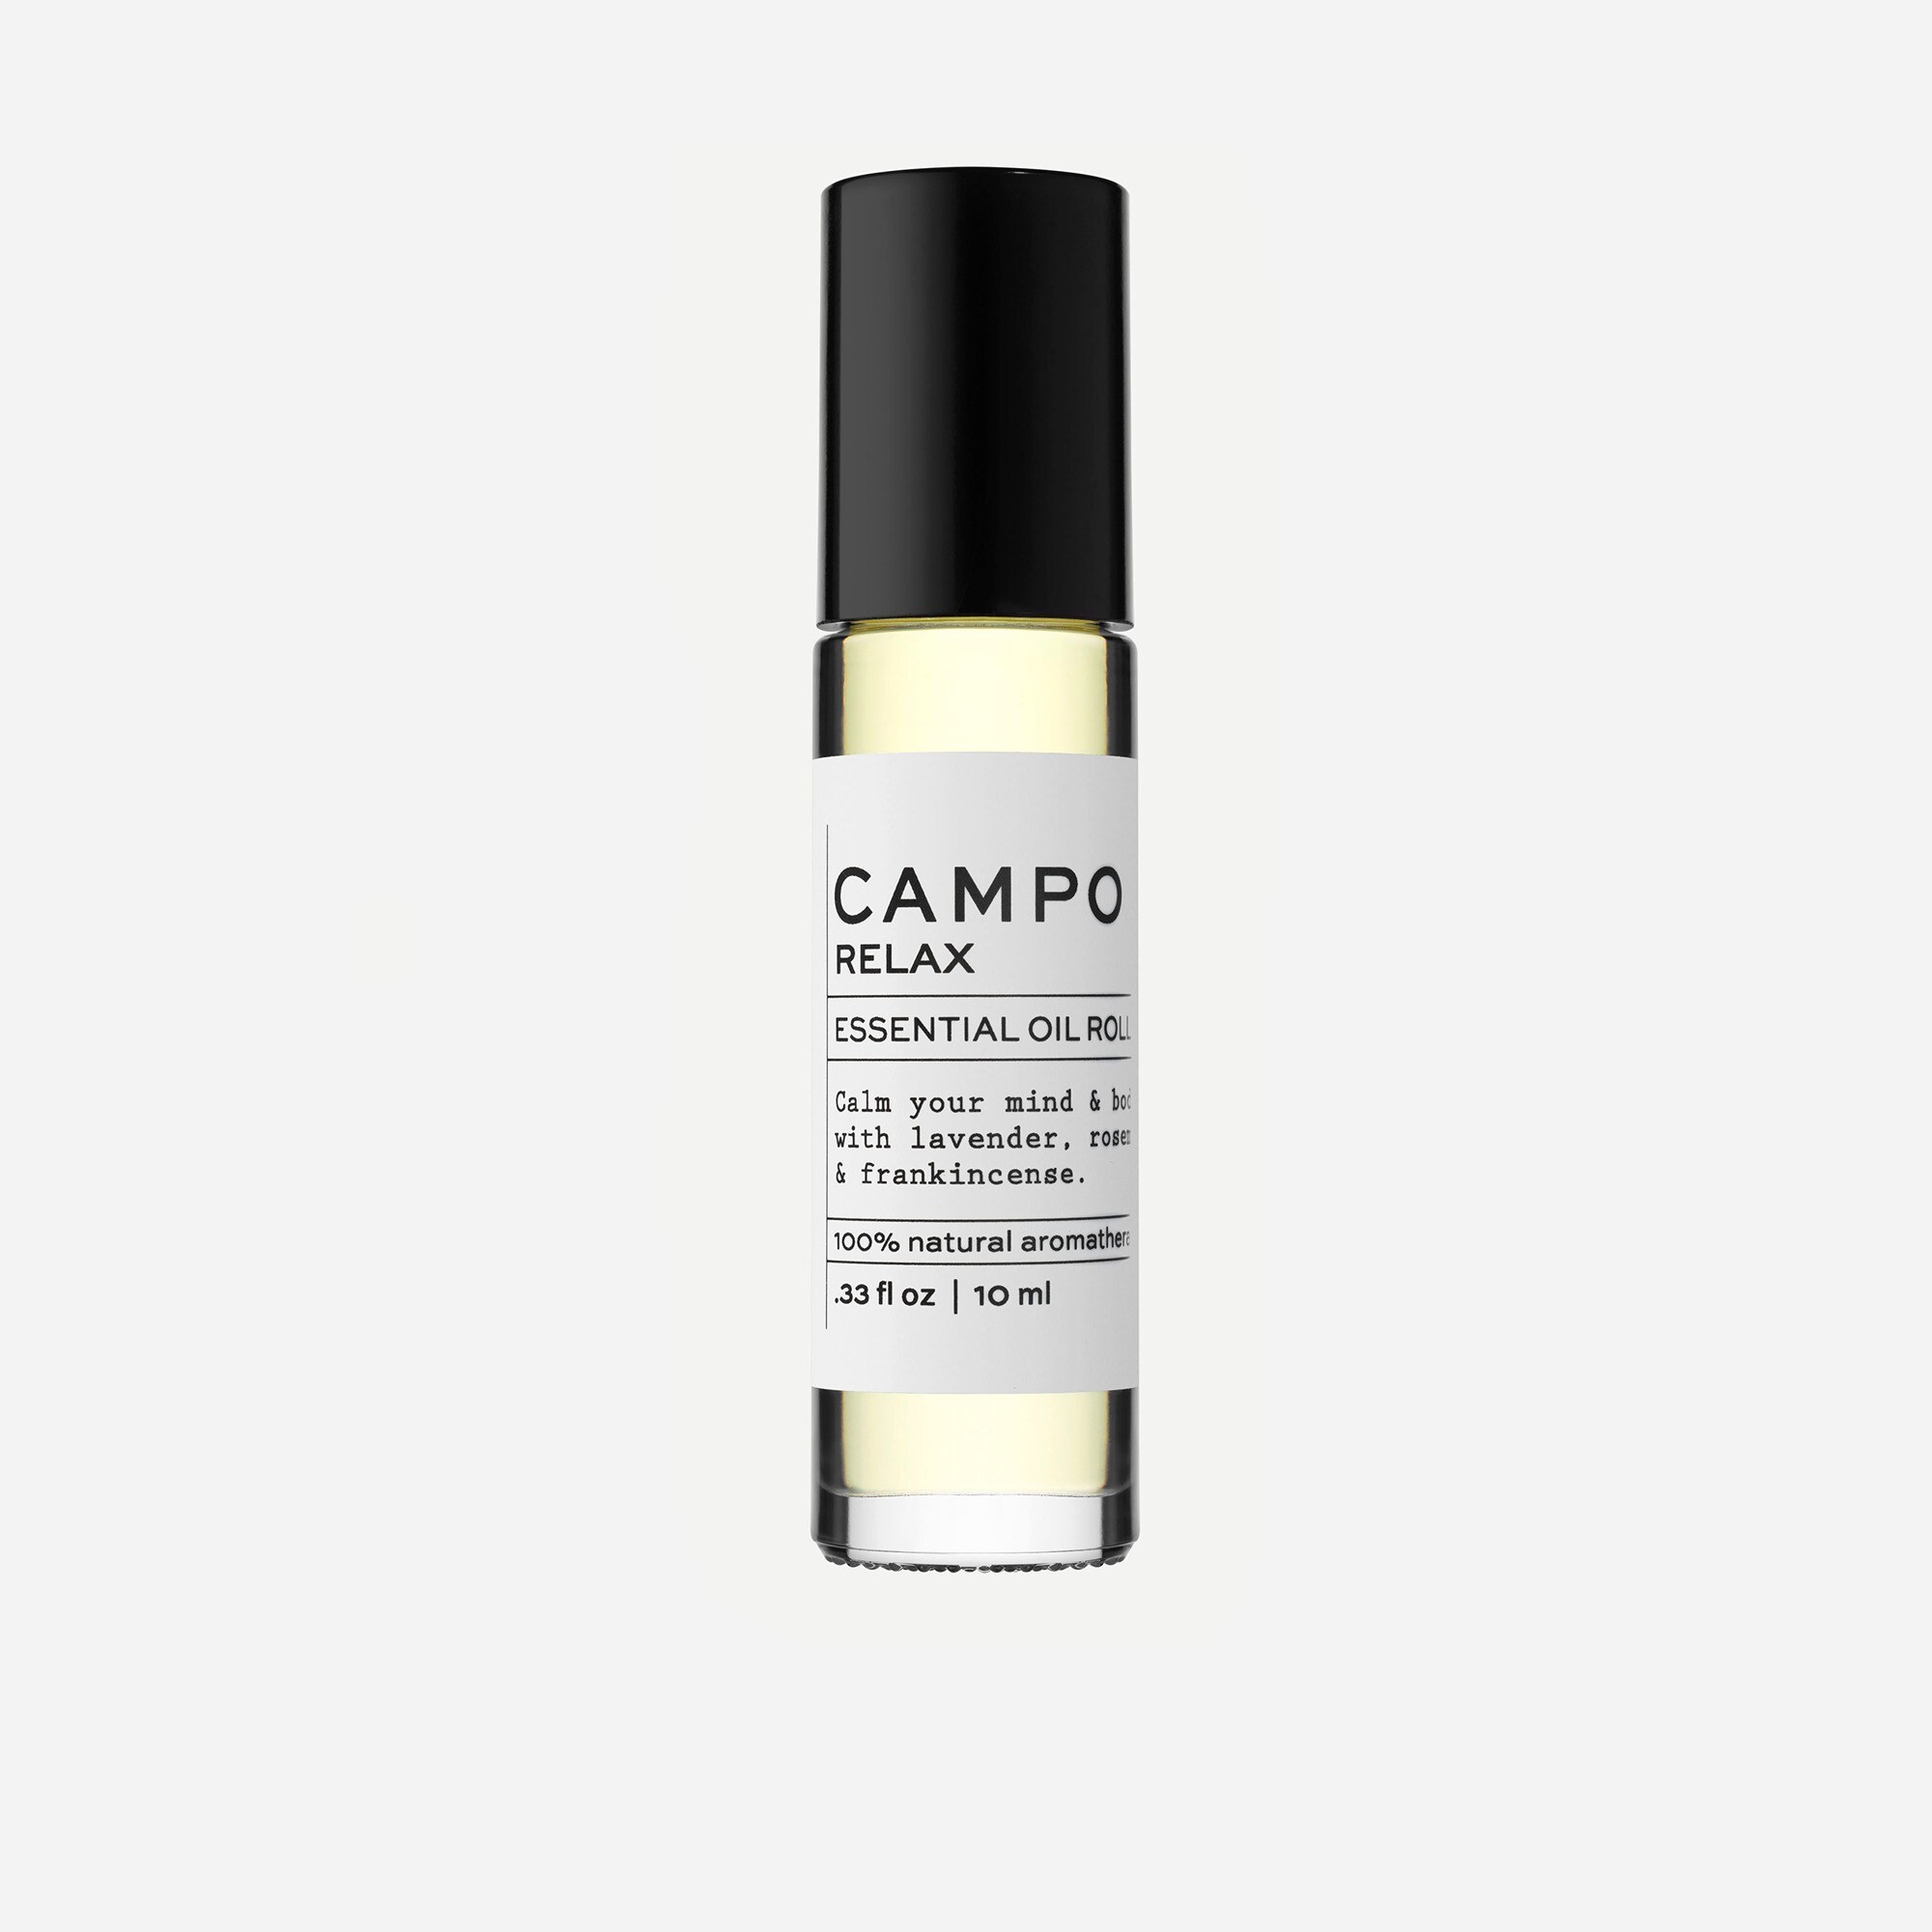  CAMPO® RELAX essential oil roll-on